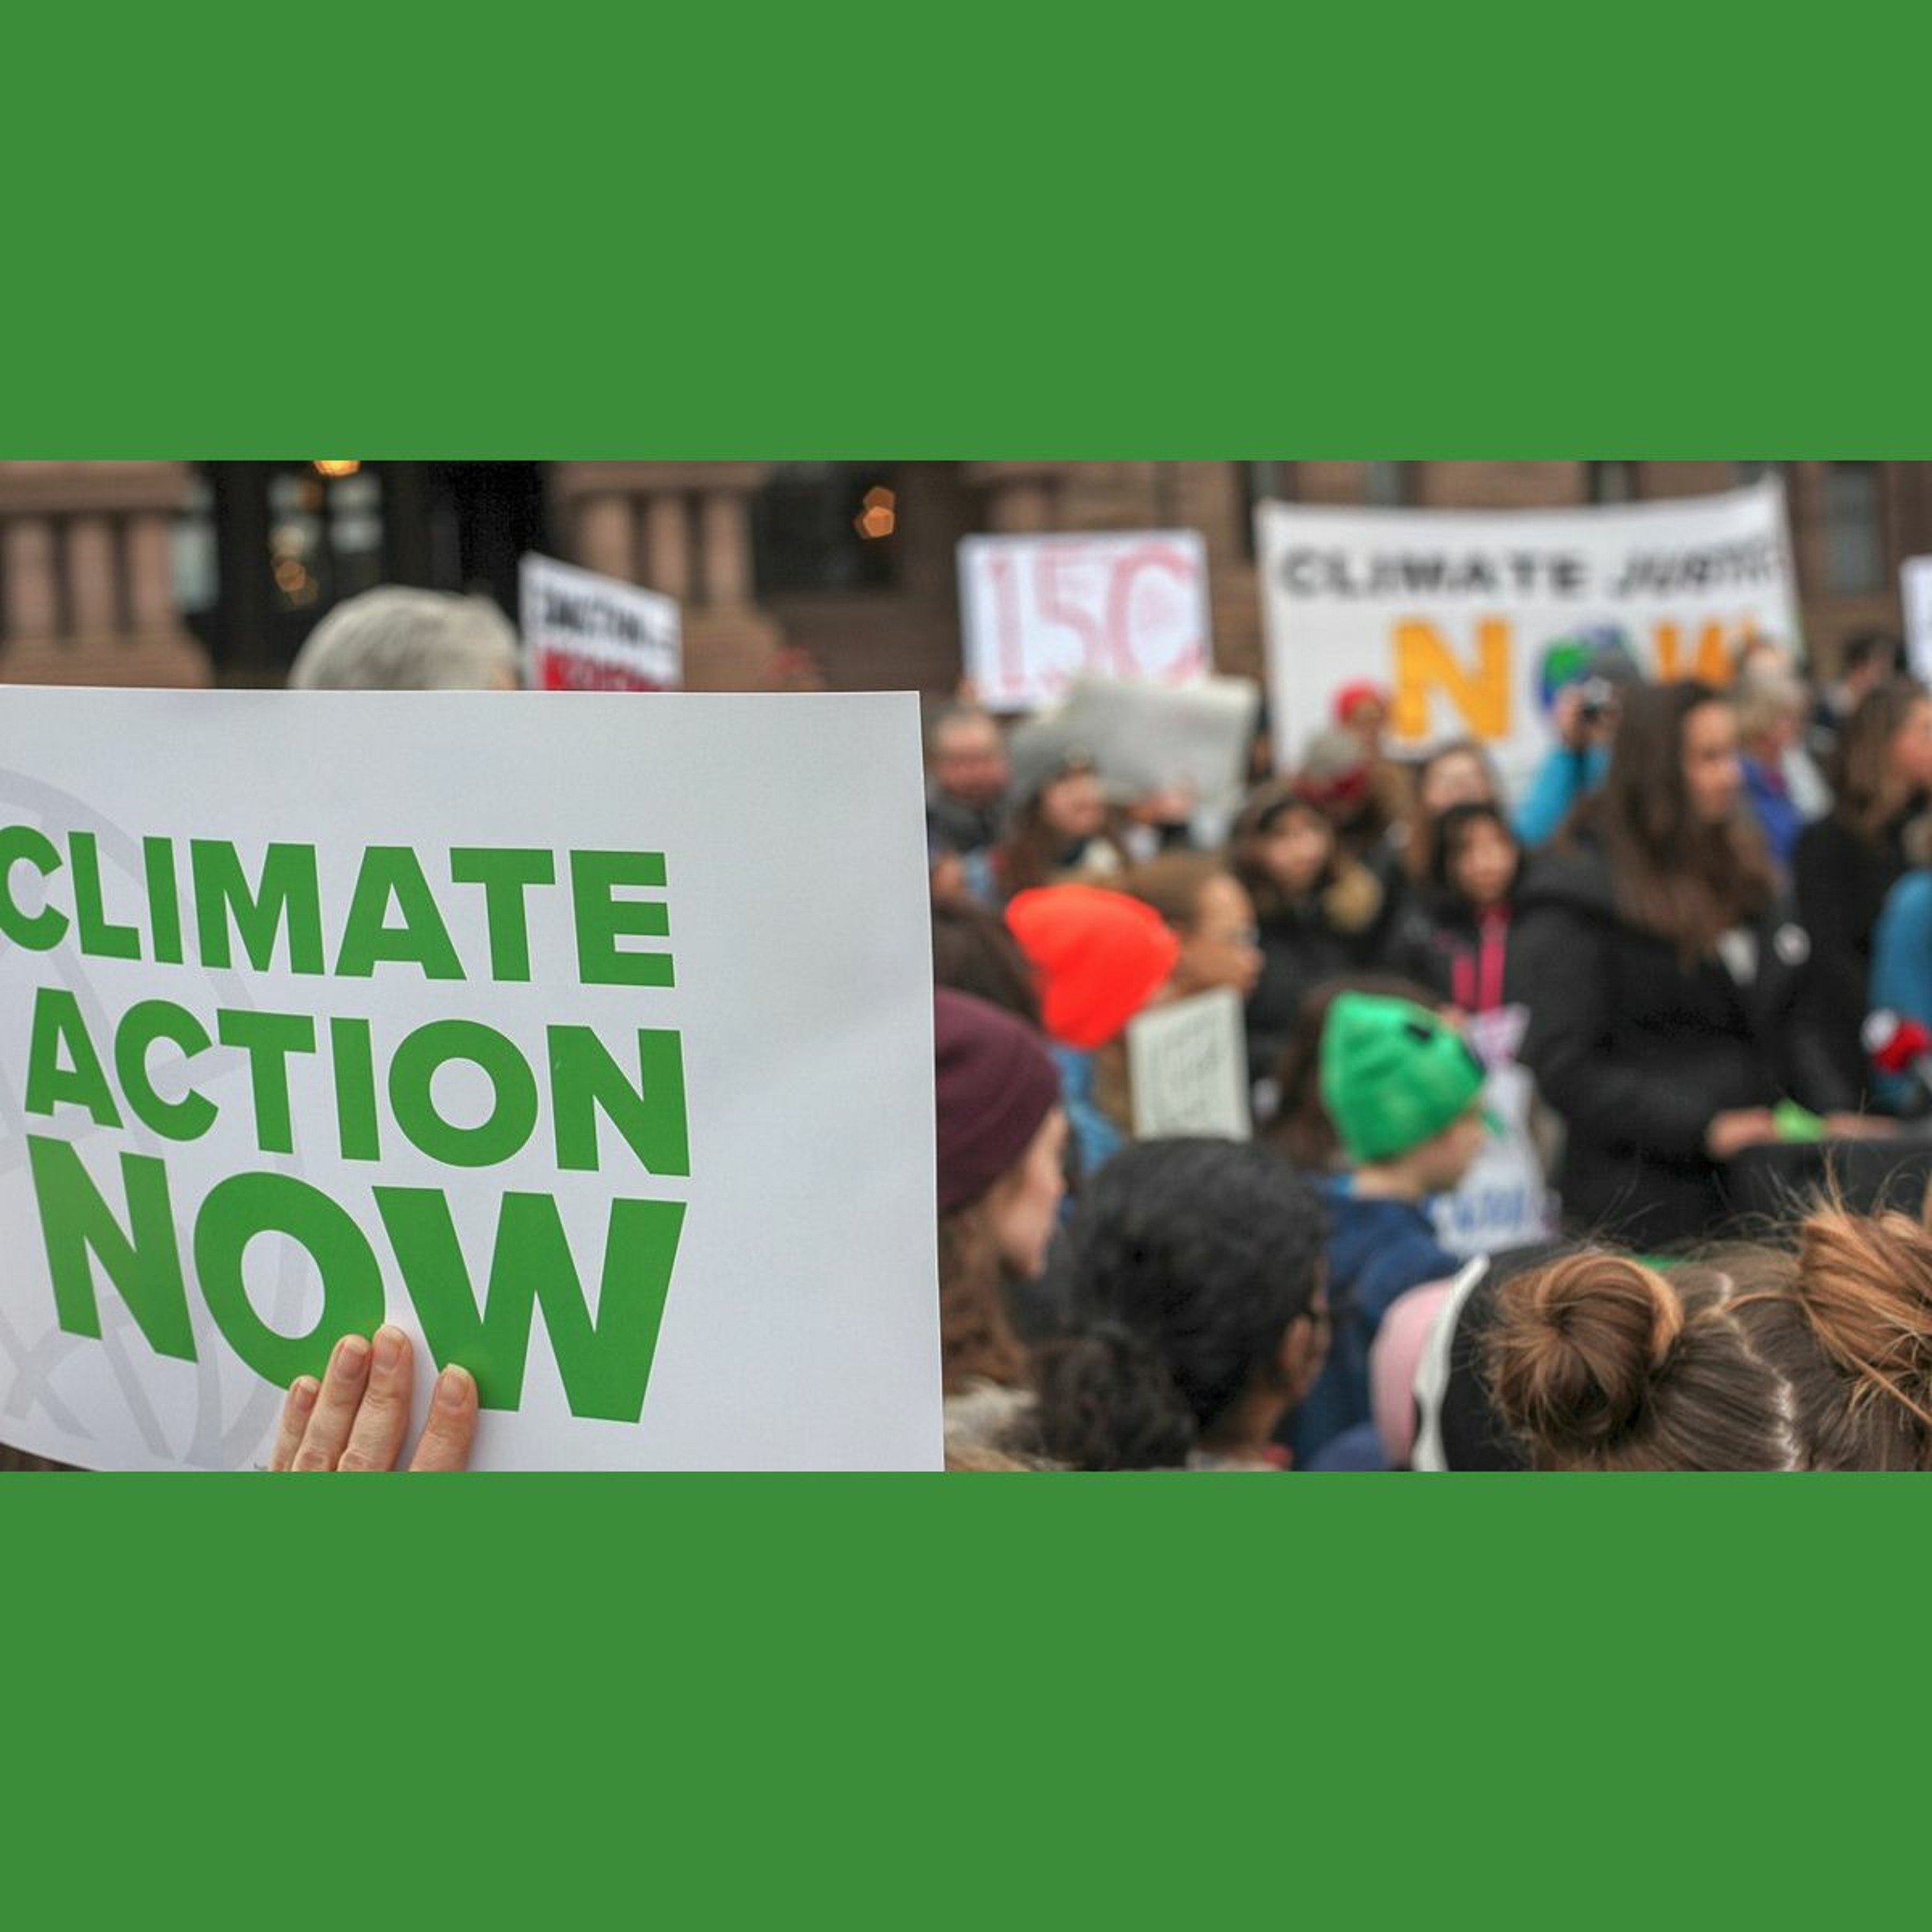 Infrastructure and support for climate justice organizing across Canada